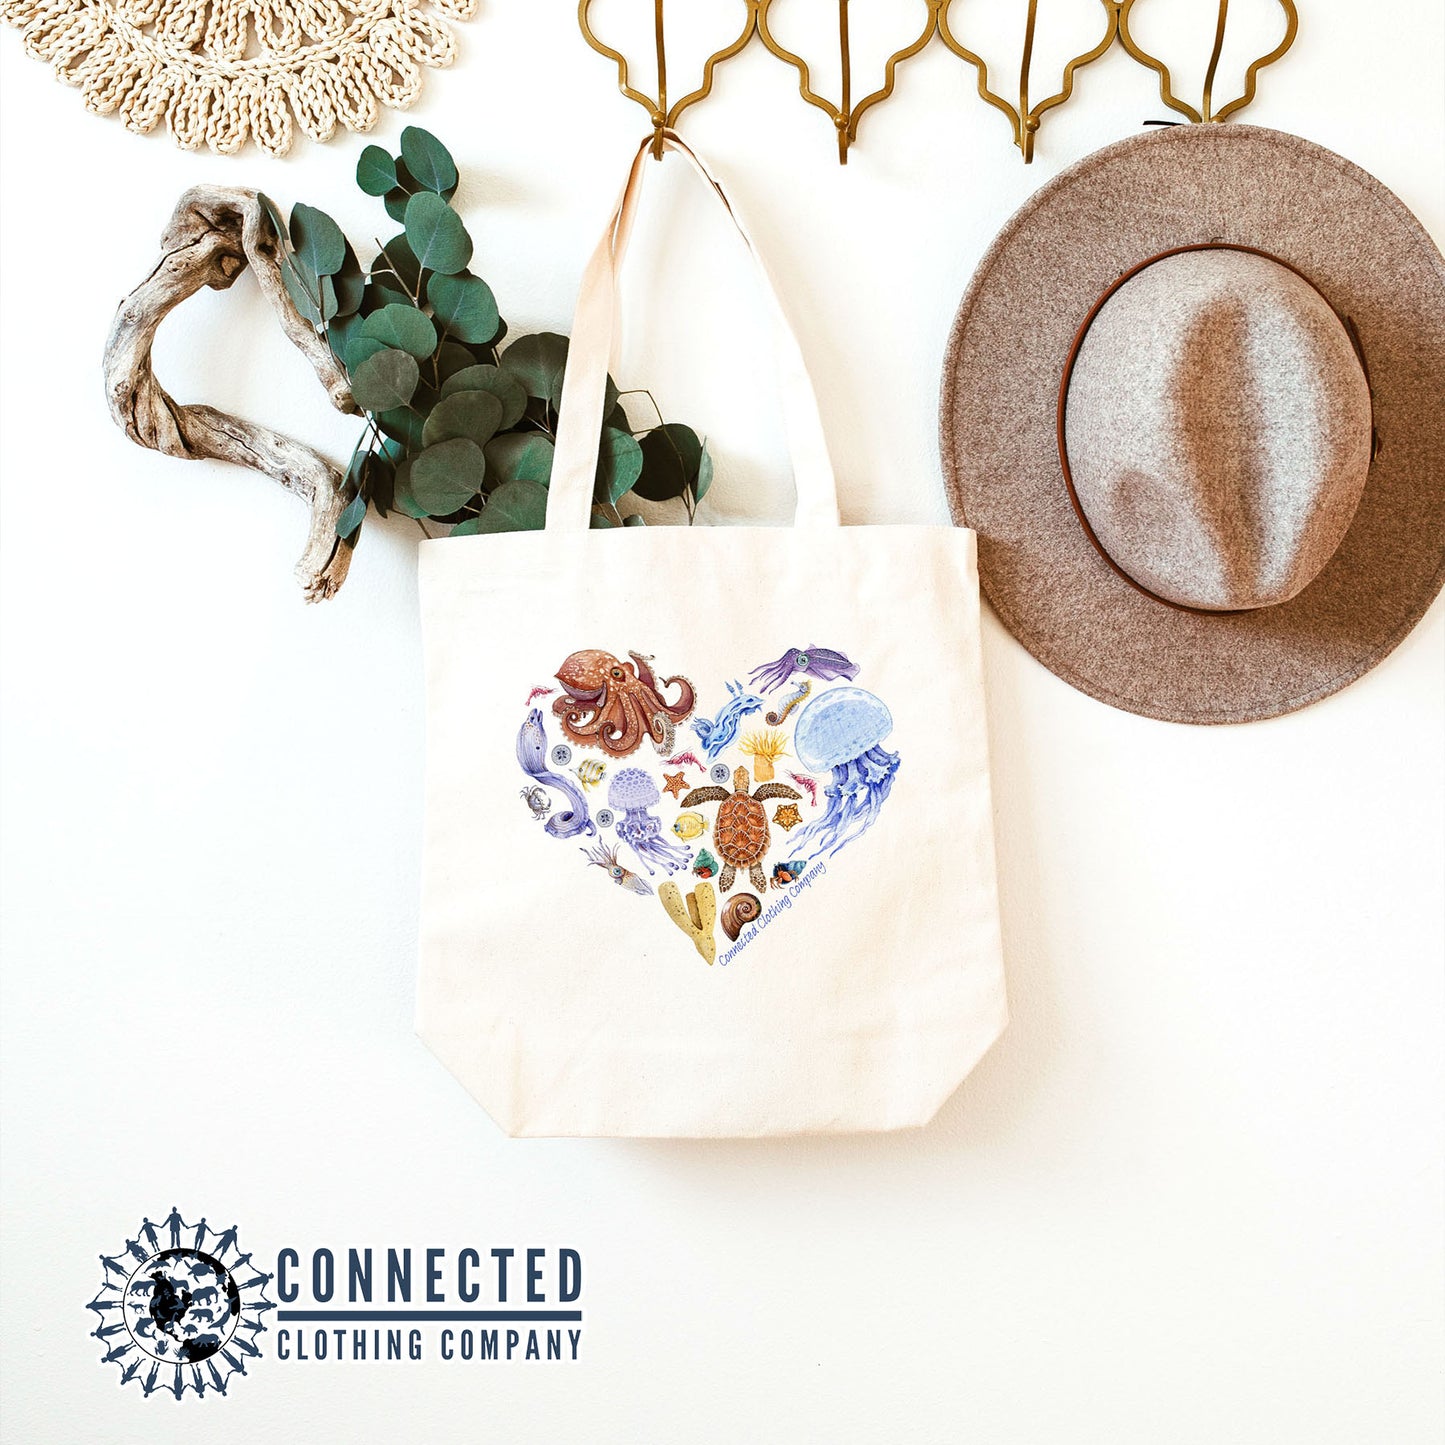 Heart Ocean Sea Creatures Tote Bag - Connected Clothing Company - 10% of proceeds donated to ocean conservation